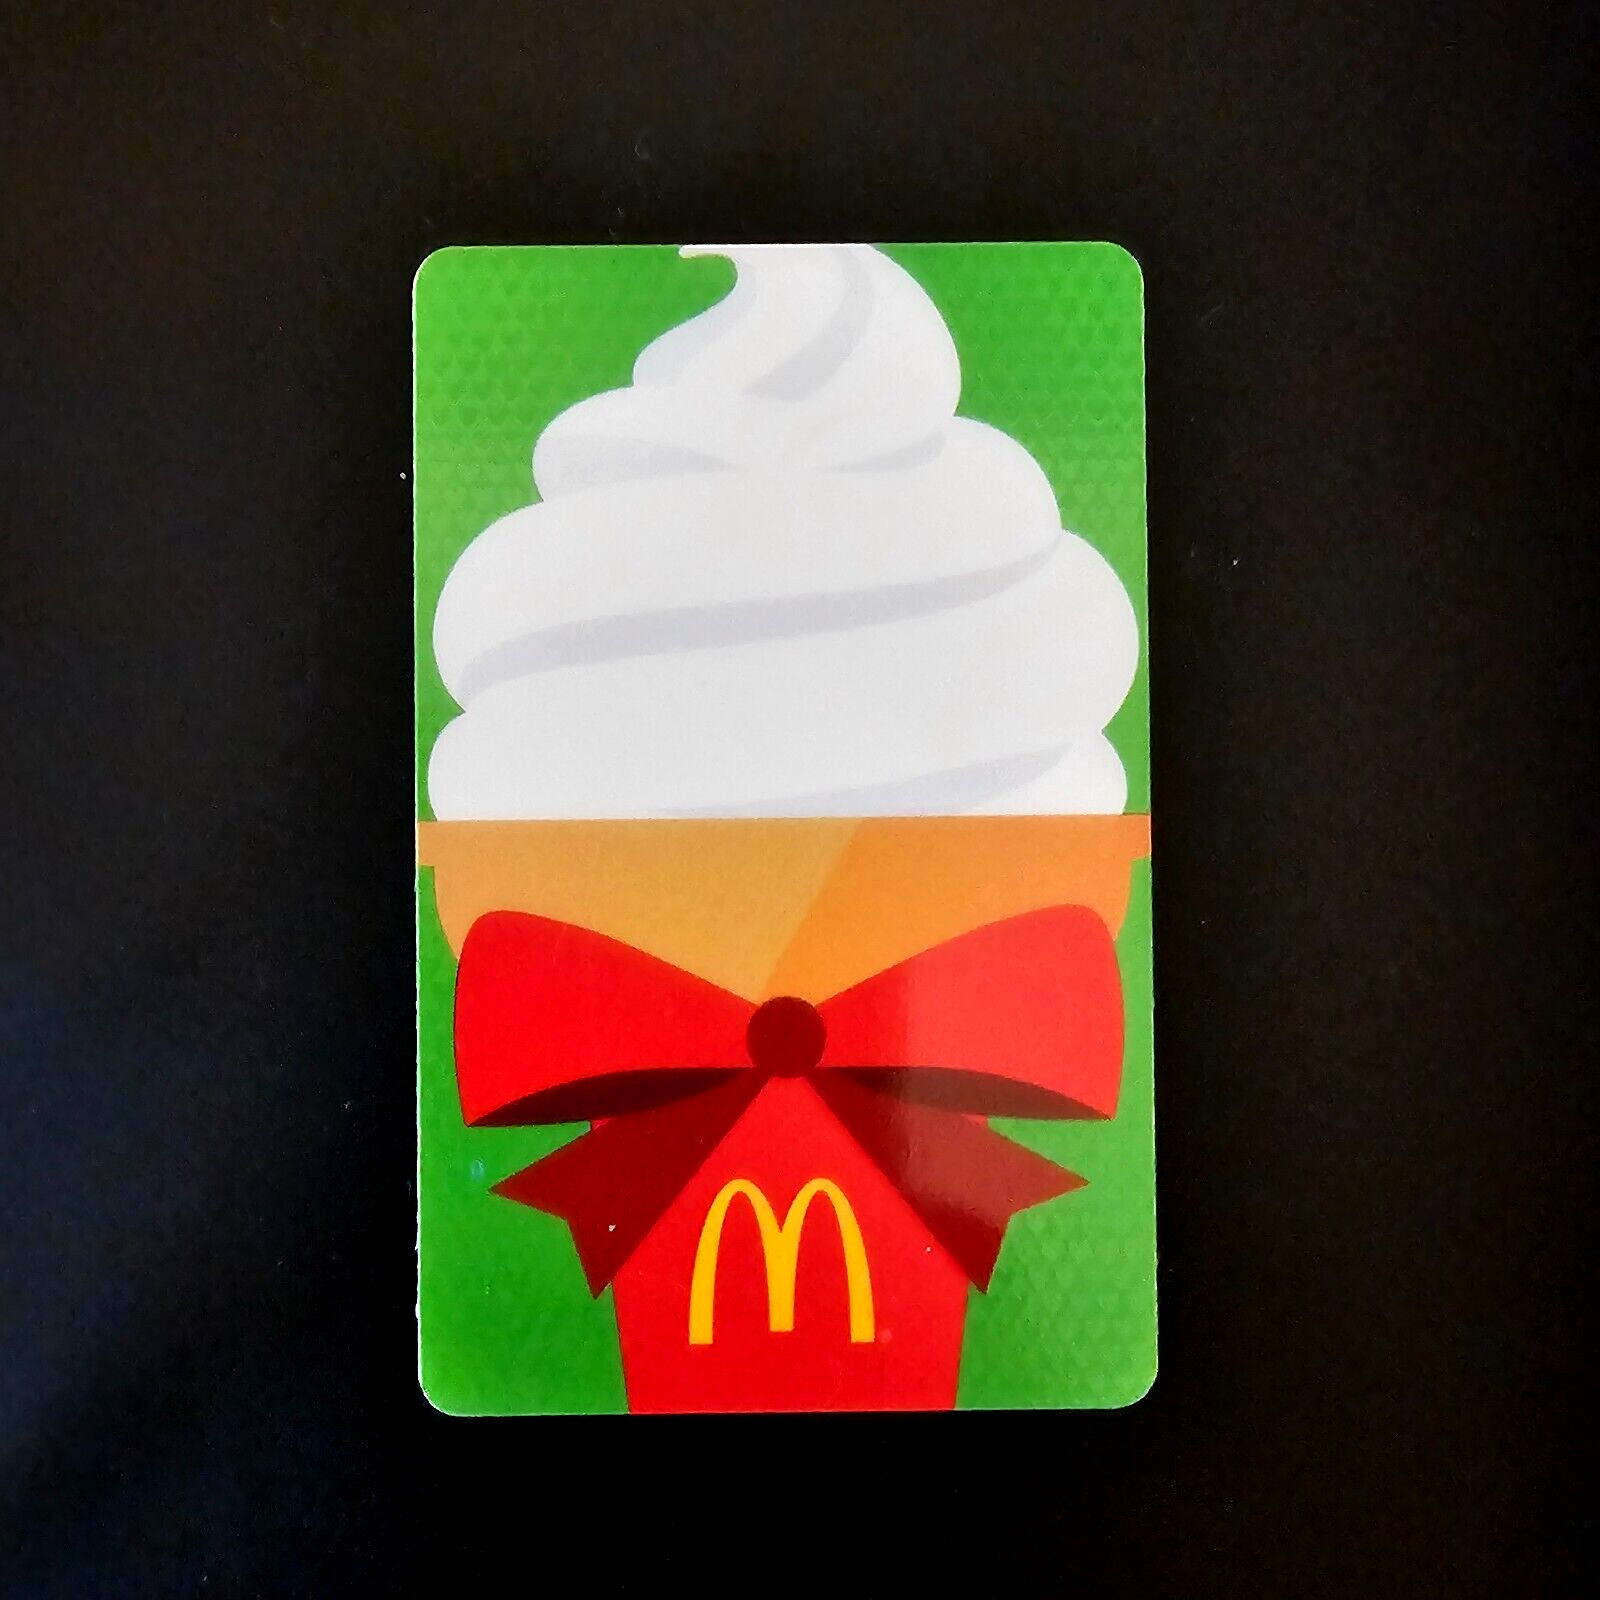 McDonalds Ice Cream Cone #6114 2015 NEW COLLECTIBLE GIFT CARD $0